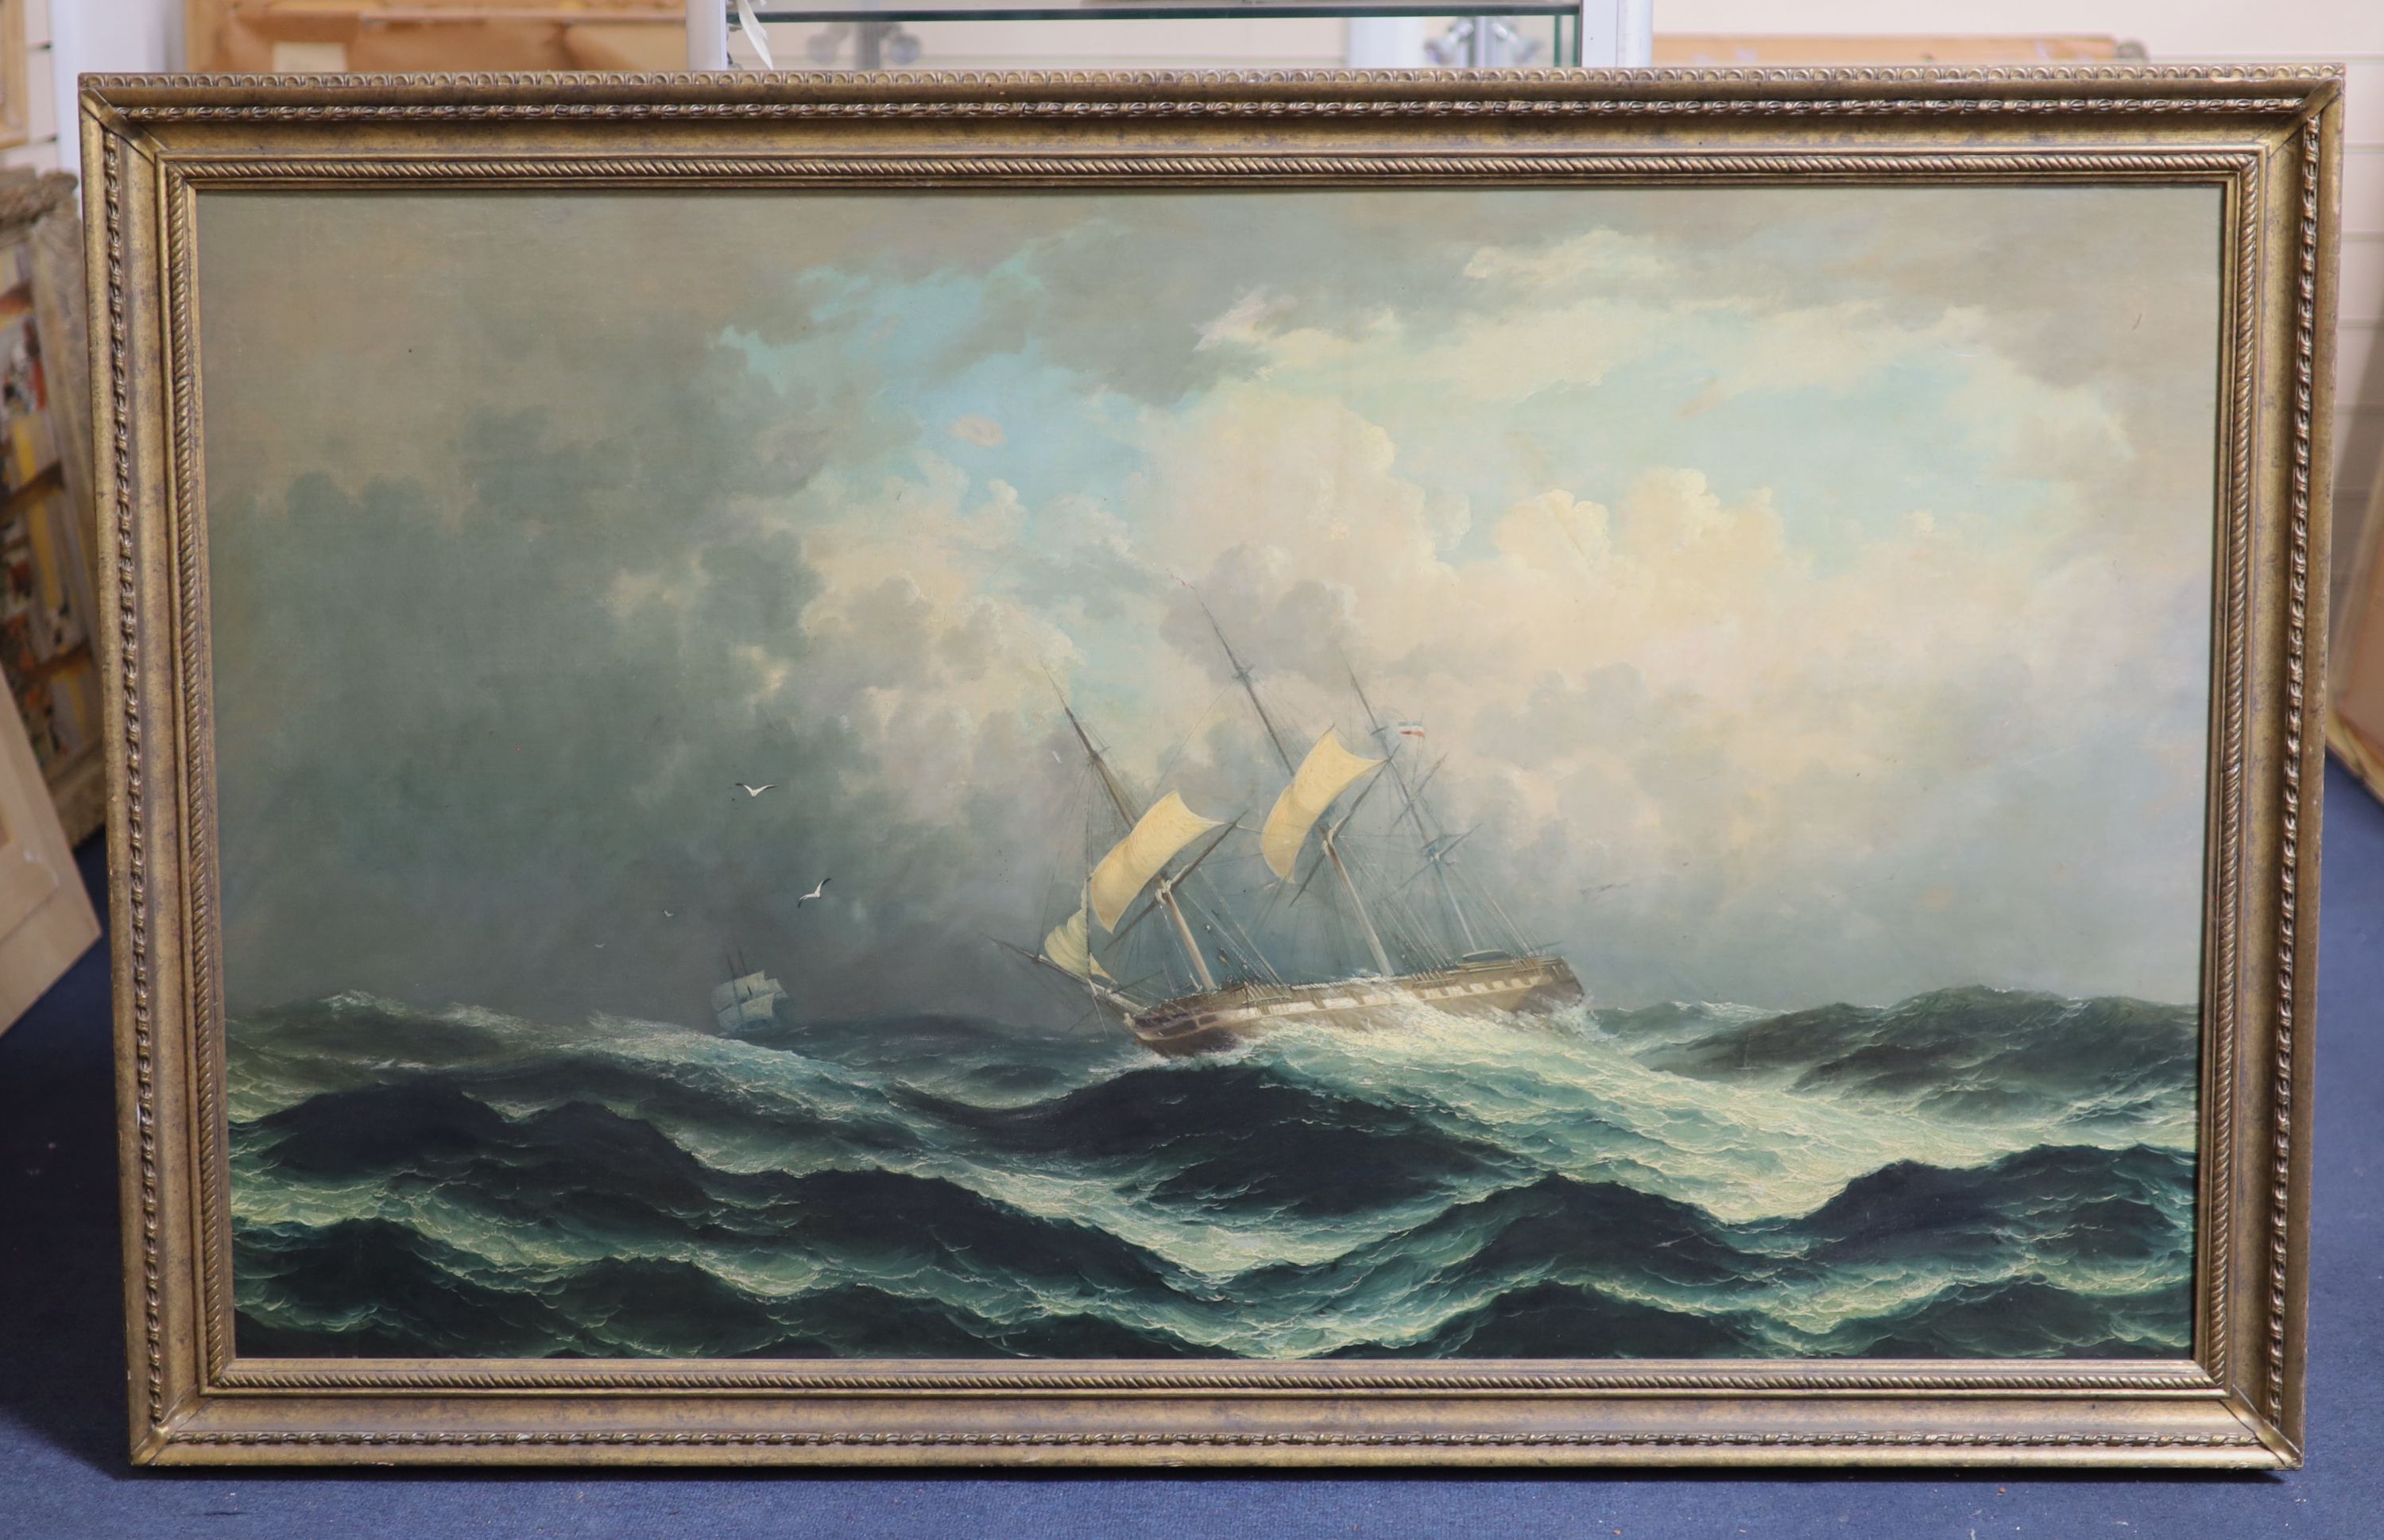 Follower of Samuel Walters (1811-1882), Three masted sailing vessel on a storm tossed sea, oil on canvas, 74 x 125 cm